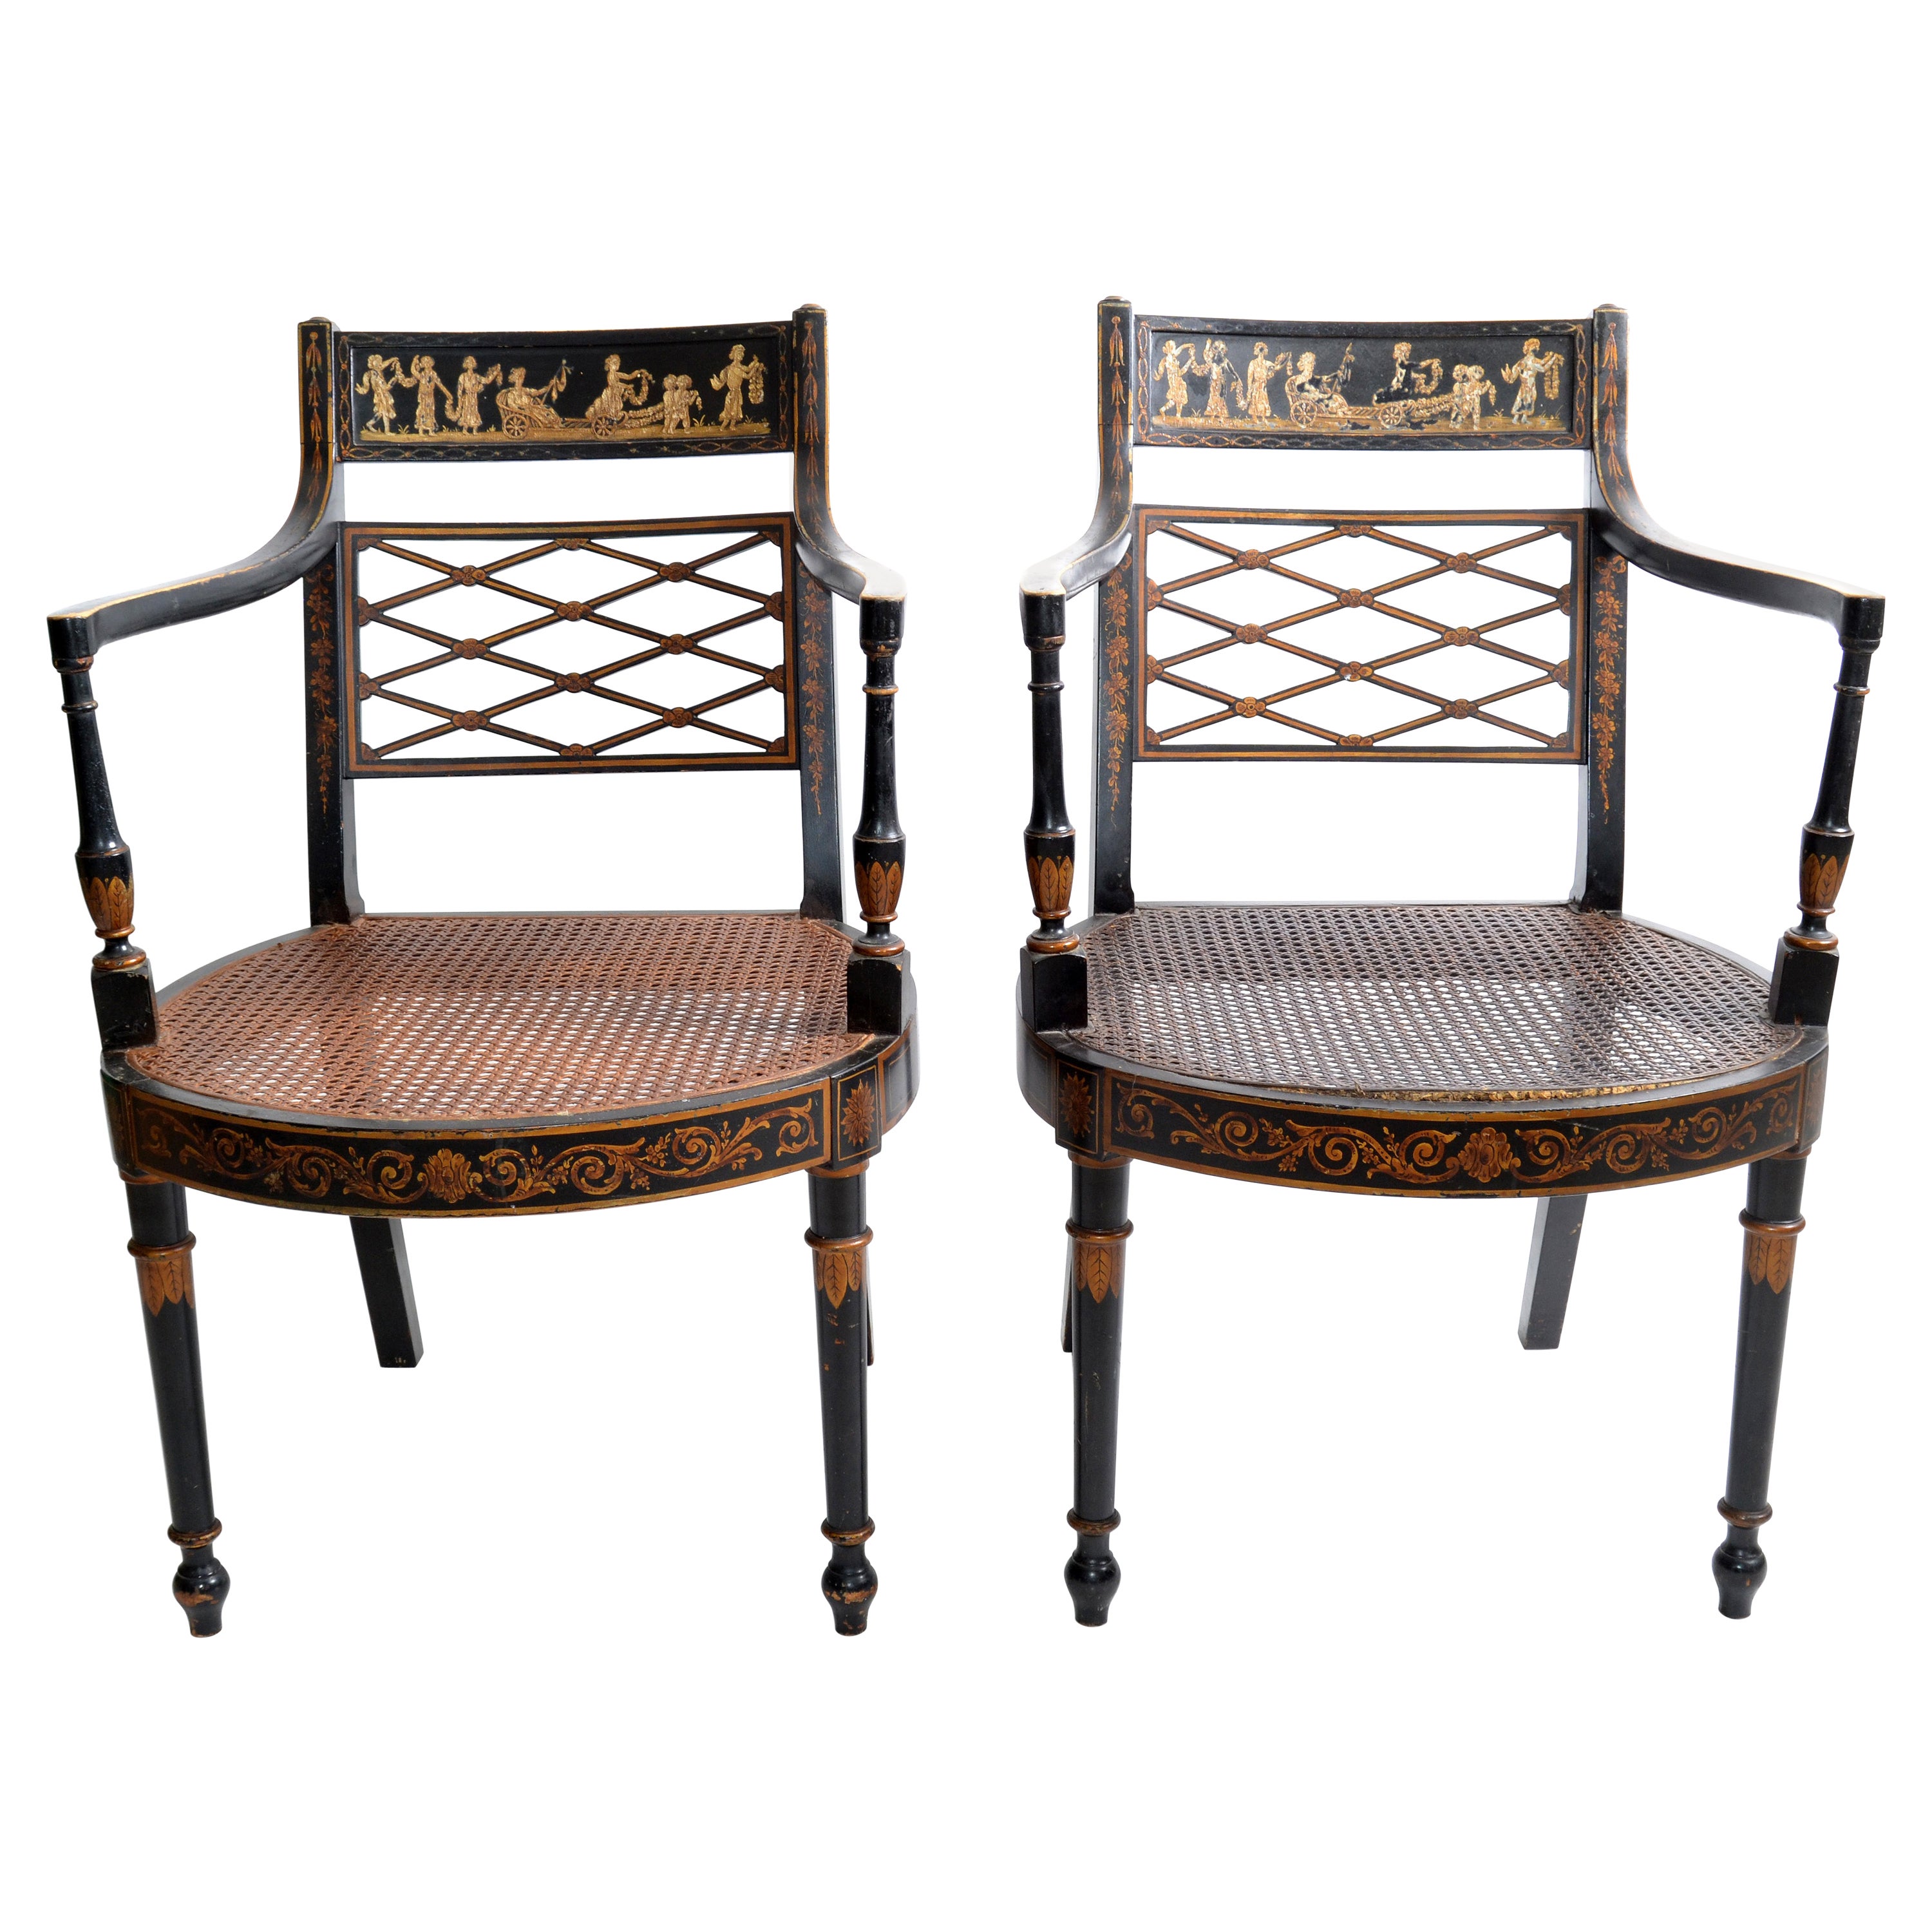 Asian Modern Antique Armchairs Black Lacquered & Gold Finish Cane Seat, Pair